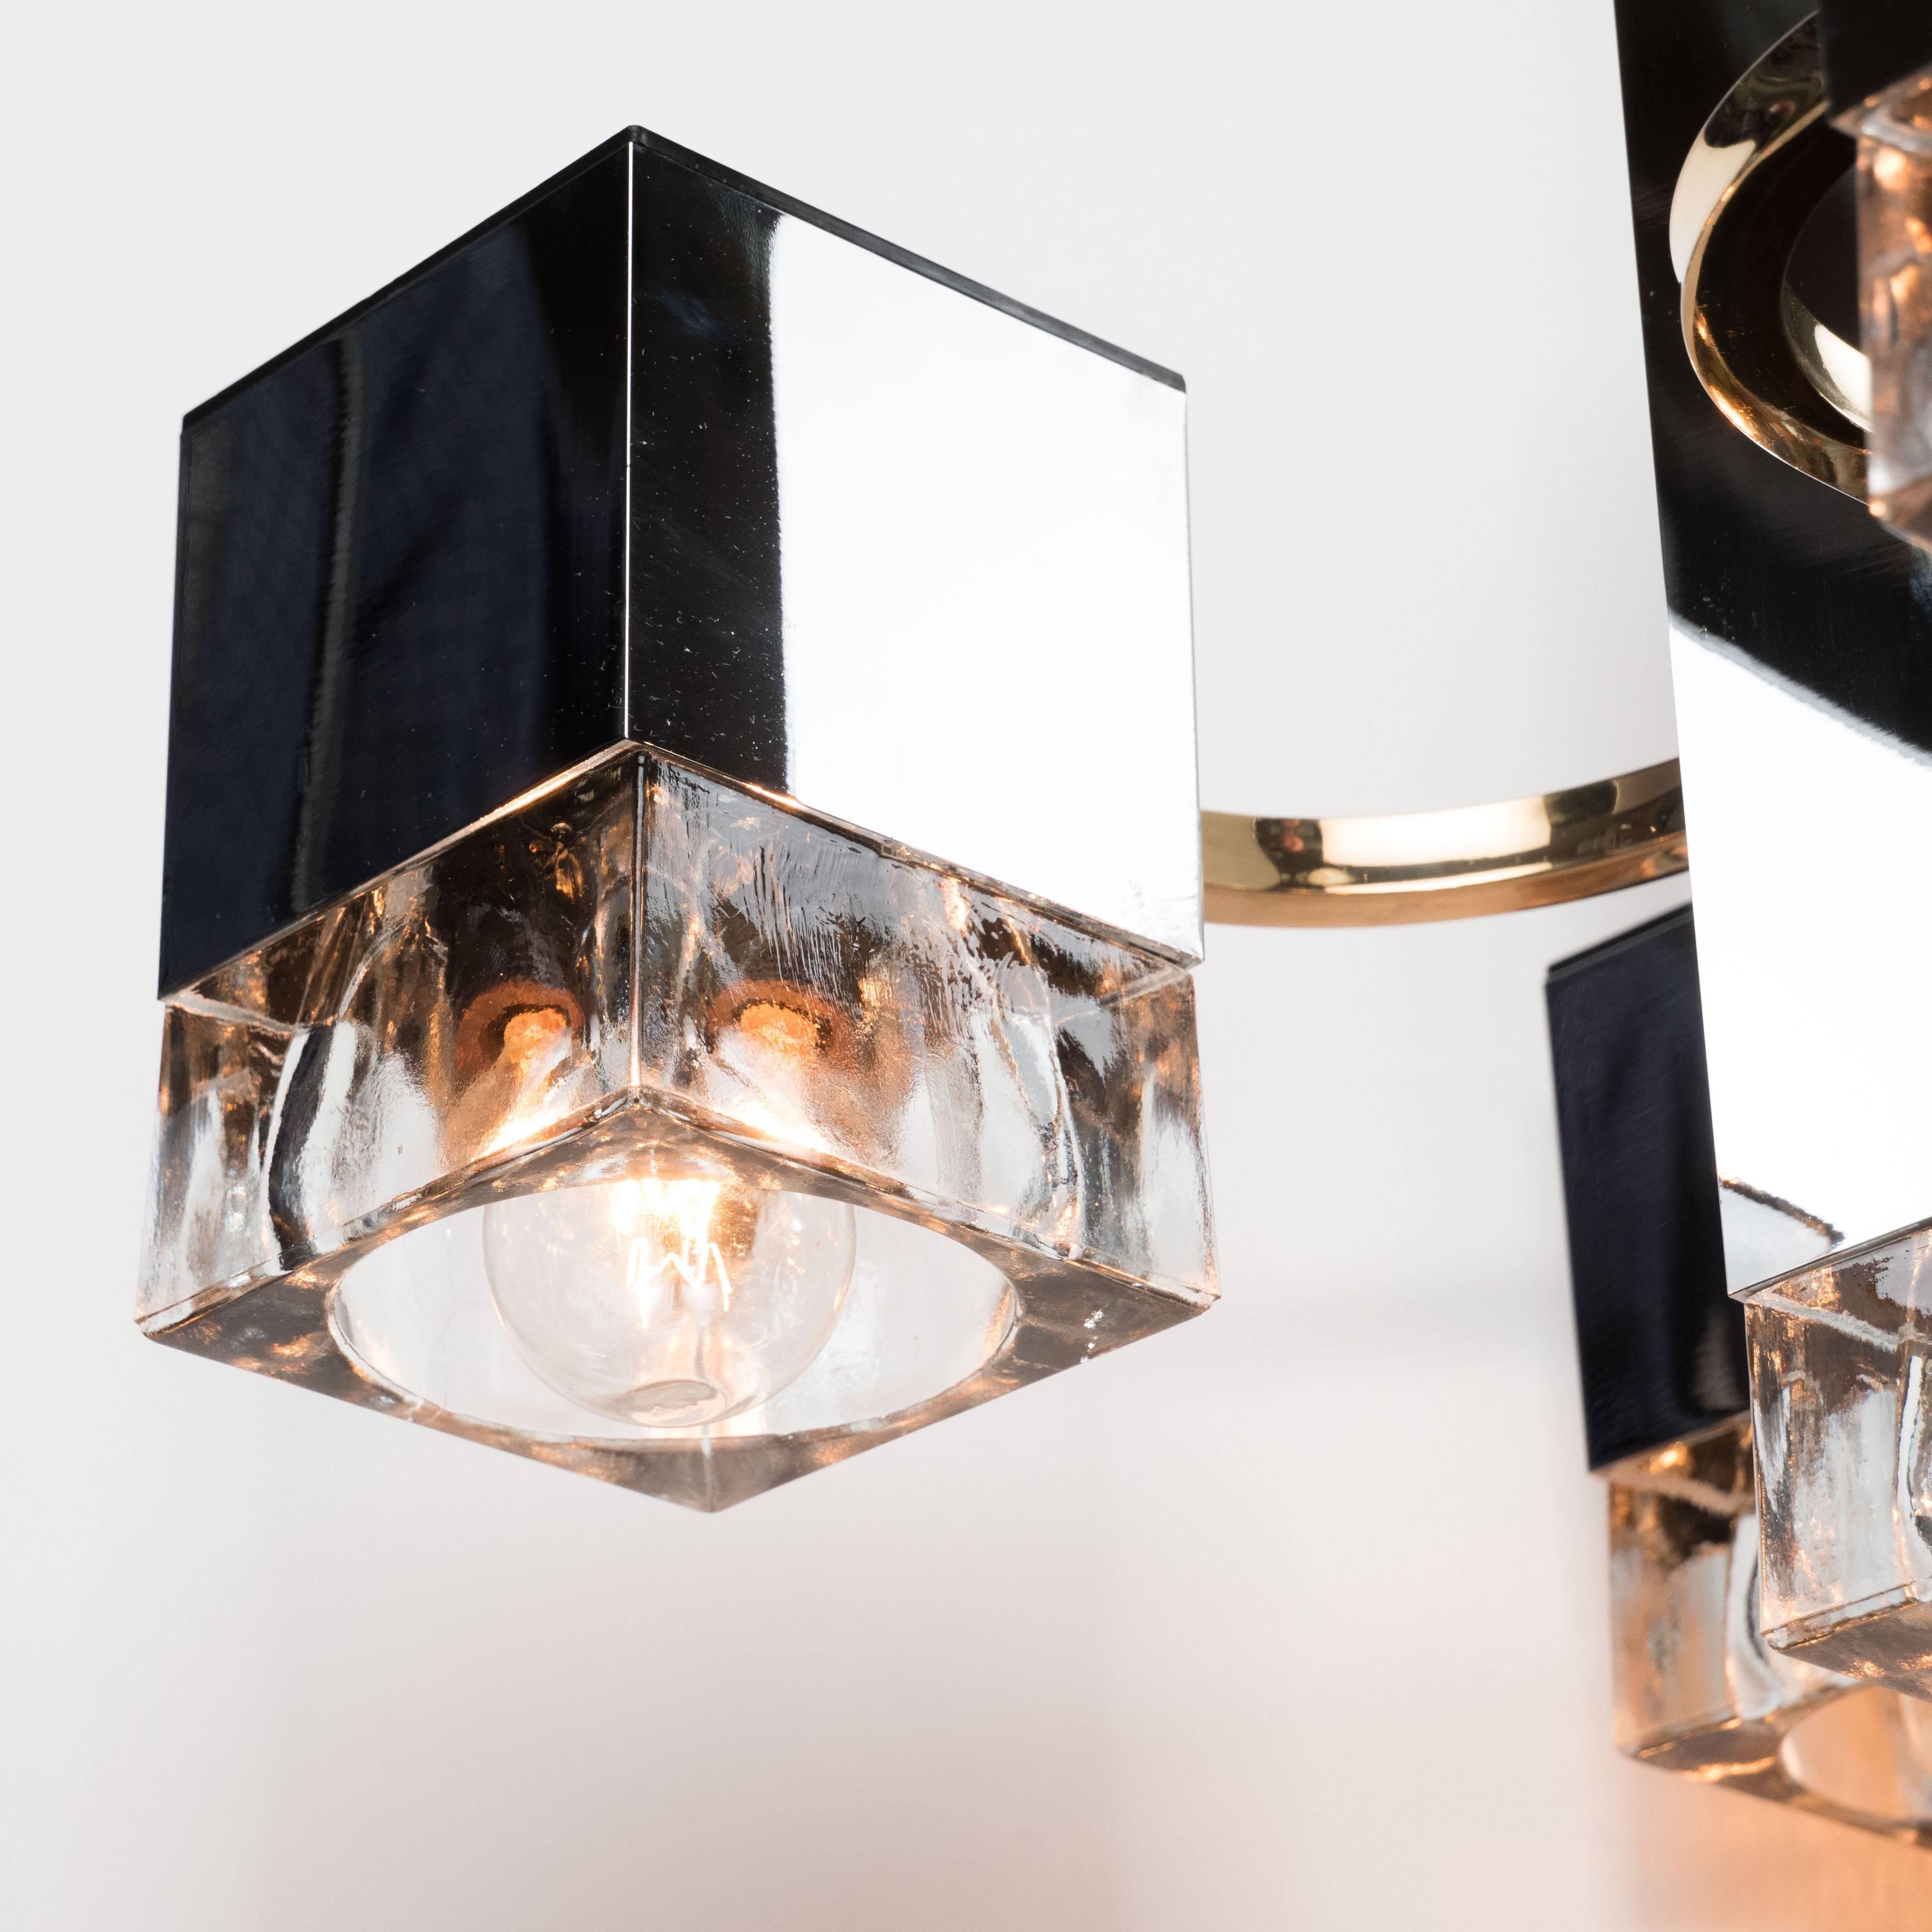 Late 20th Century Mid-Century Sciolari Chandelier With Waterglass Cubes, Chrome and Brass